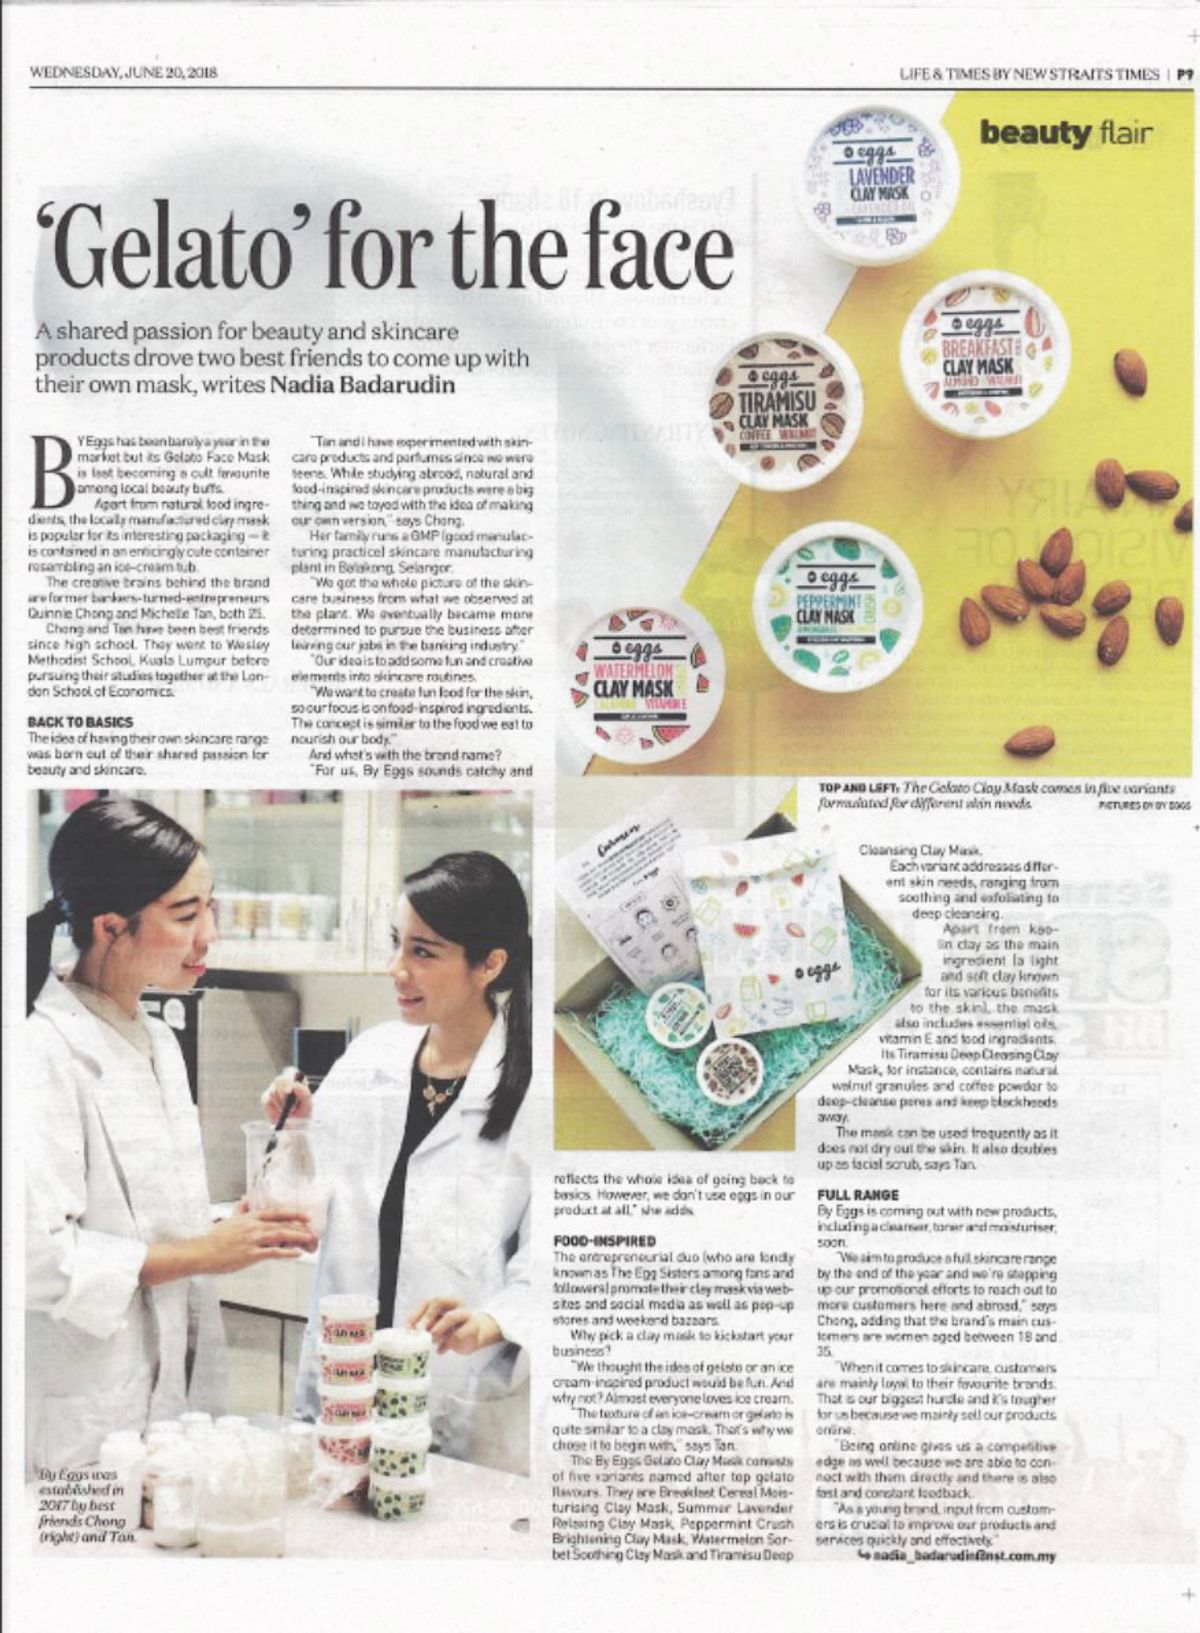 By Eggs featured on the New Straits Times!